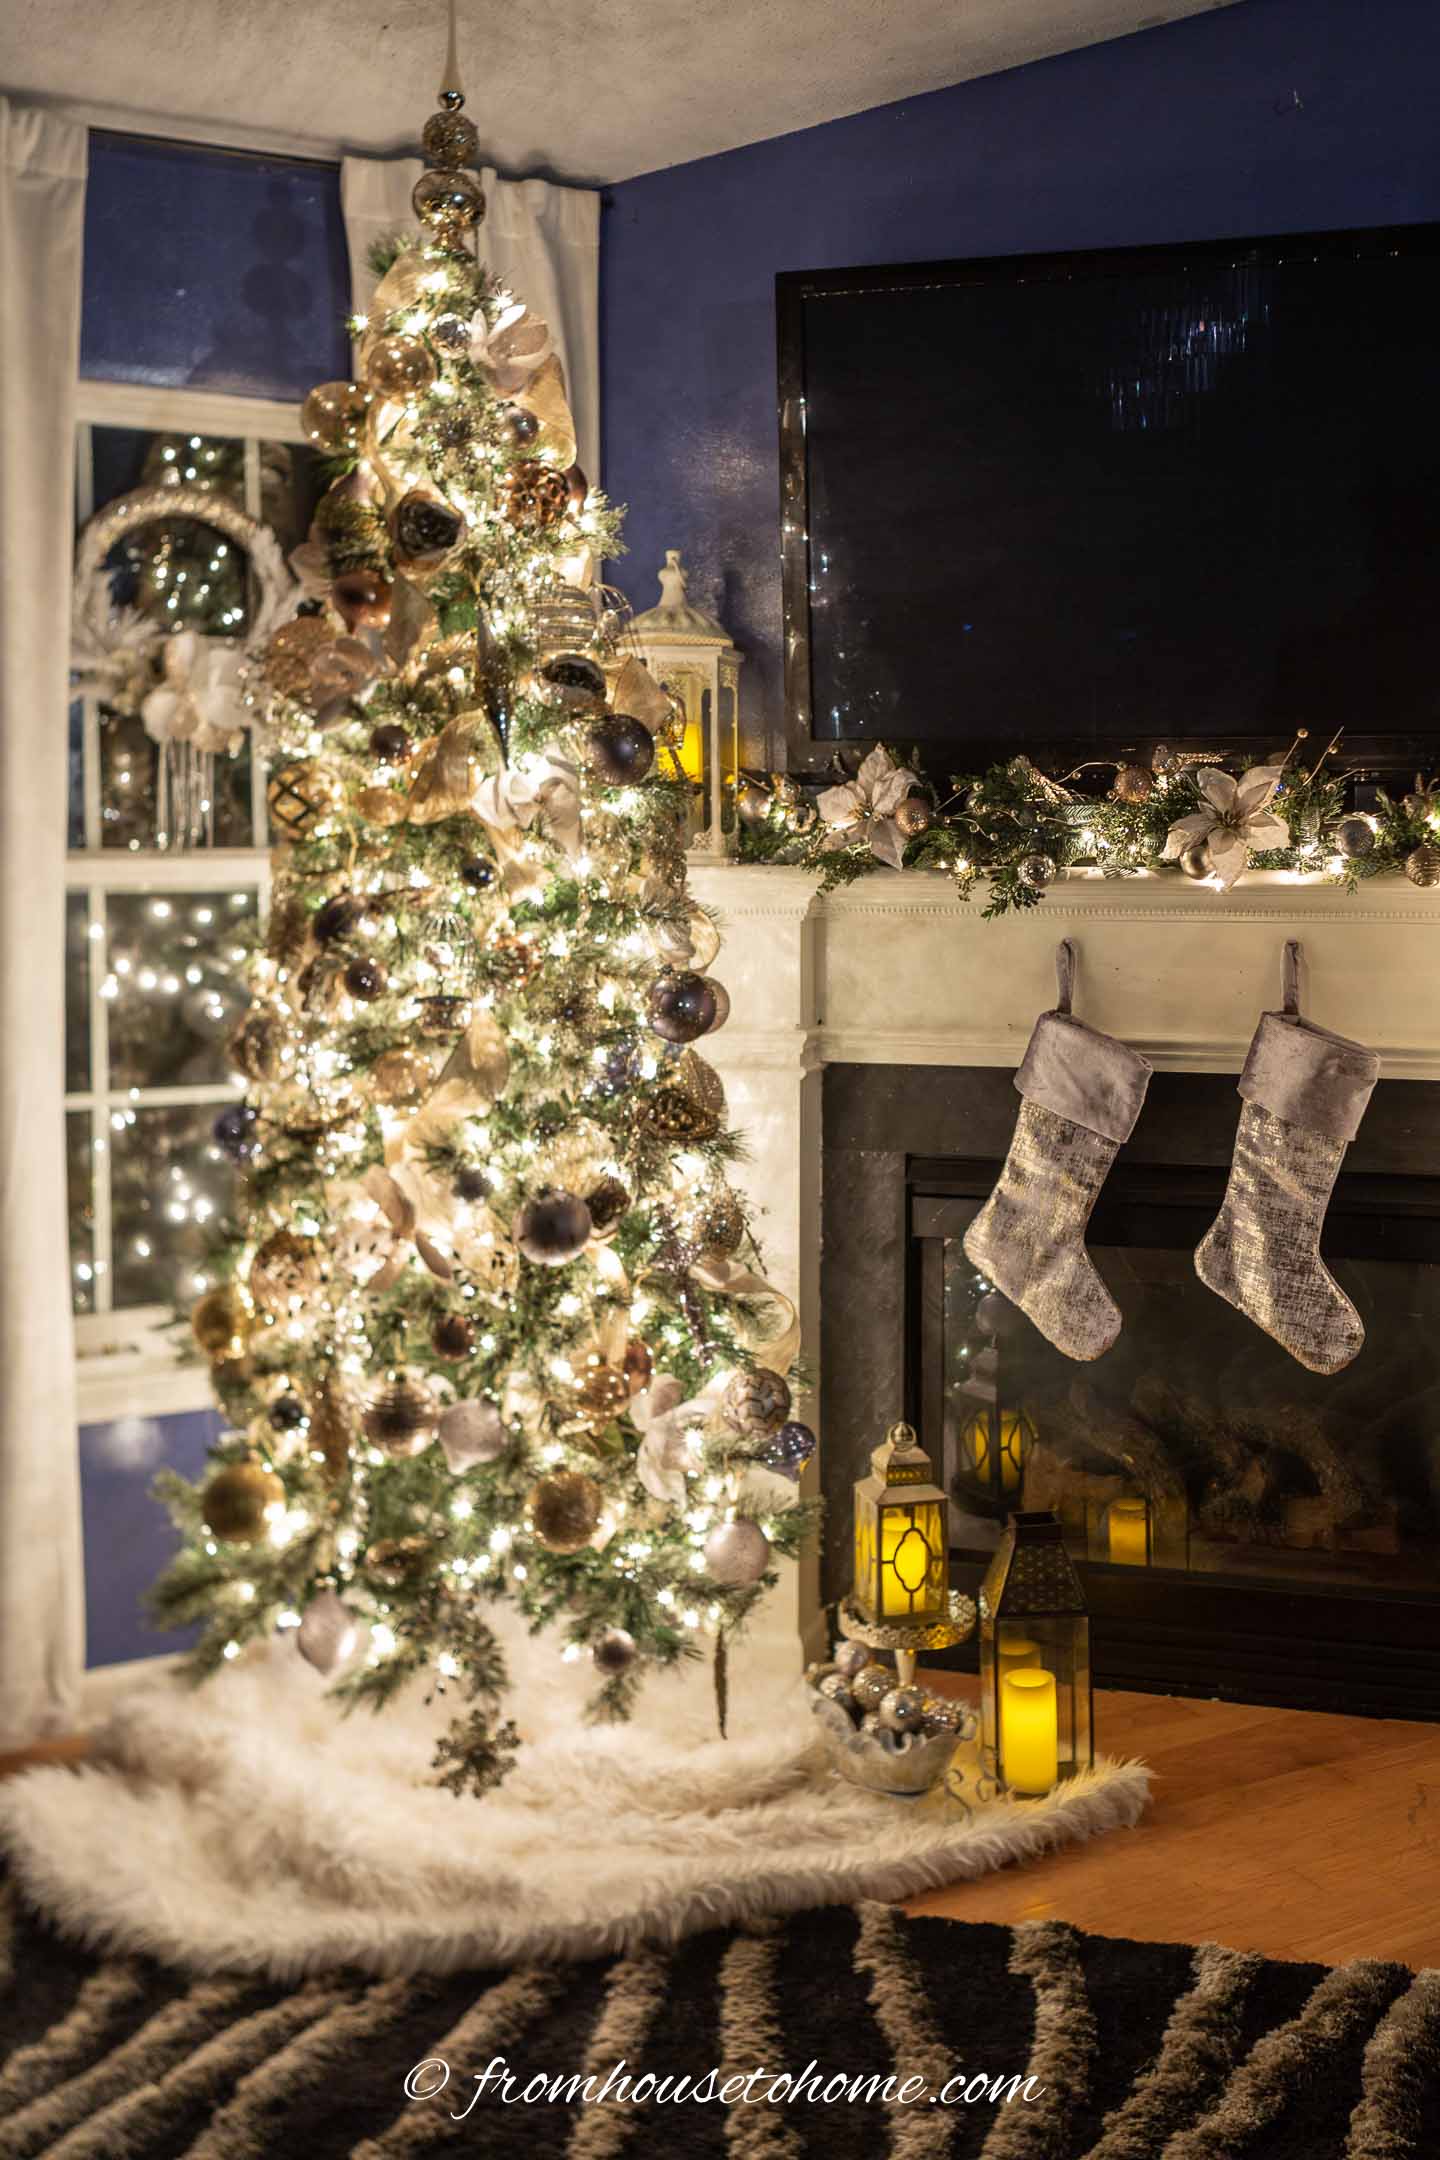 Mixed metals Christmas tree lit up at night beside a fireplace mantel